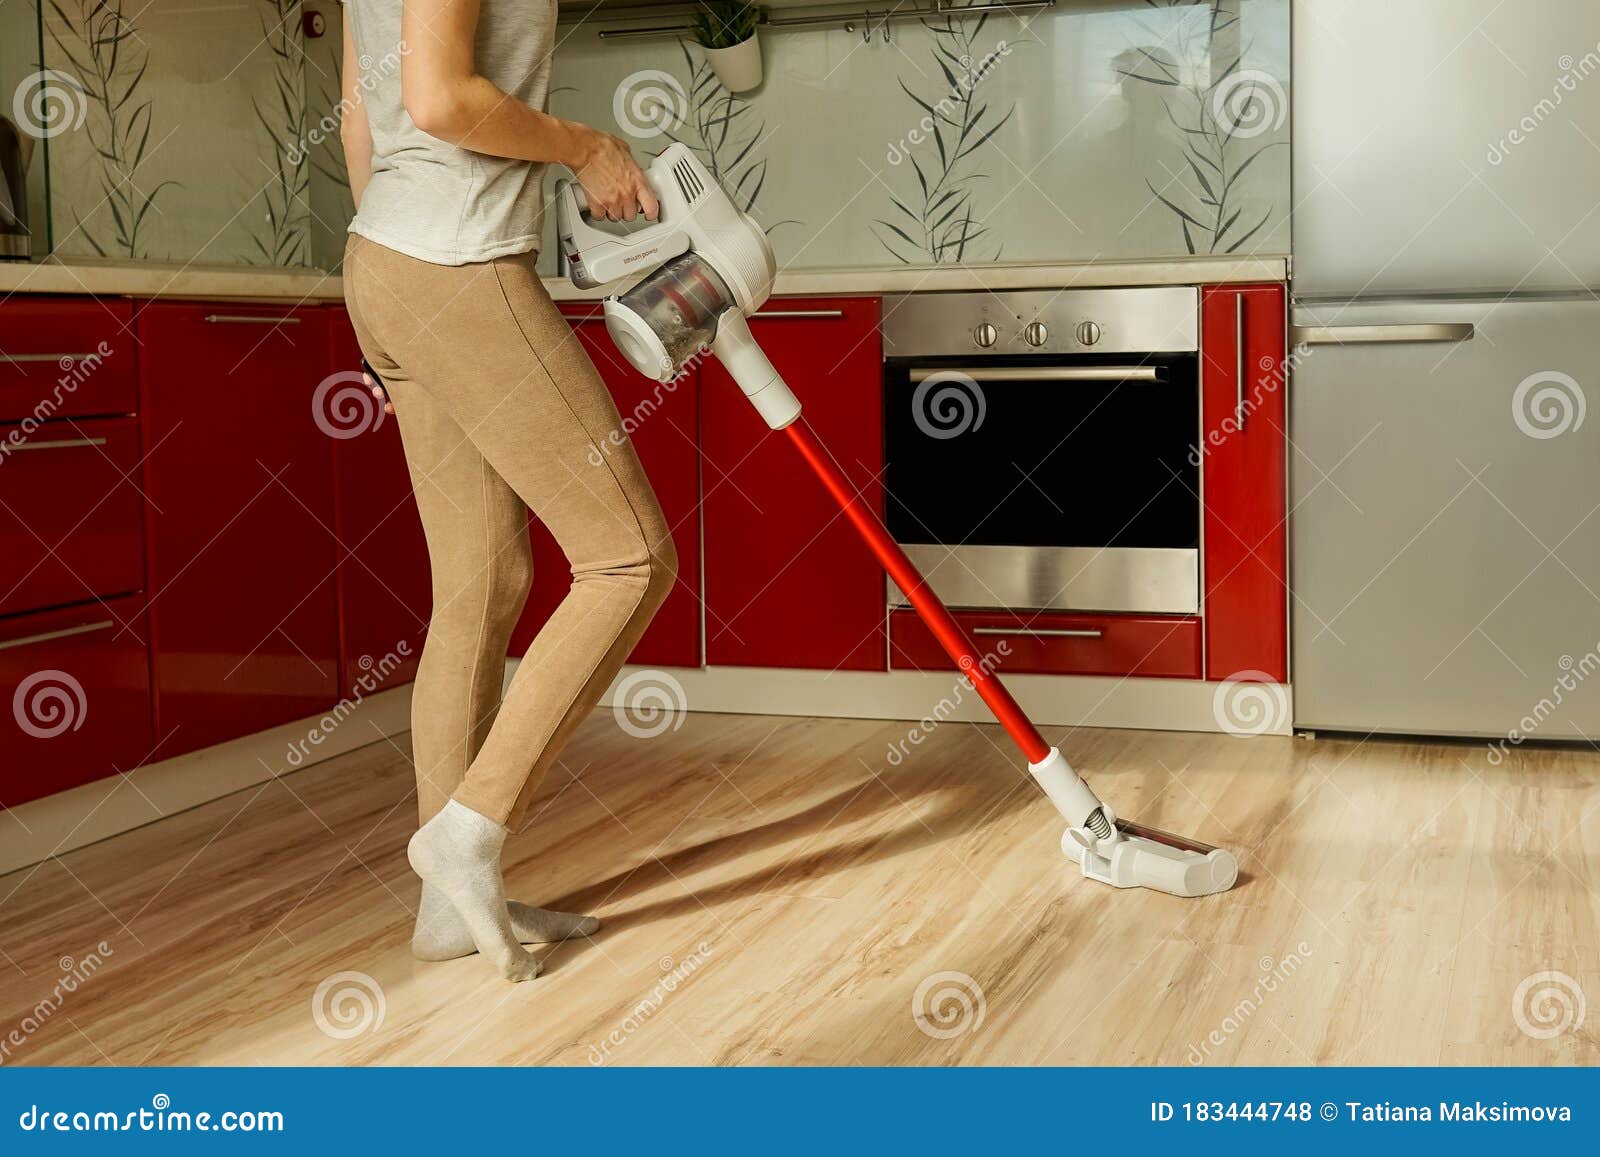 Woman Cleaning House With Wireless Vacuum Cleaner Stock Photo Image